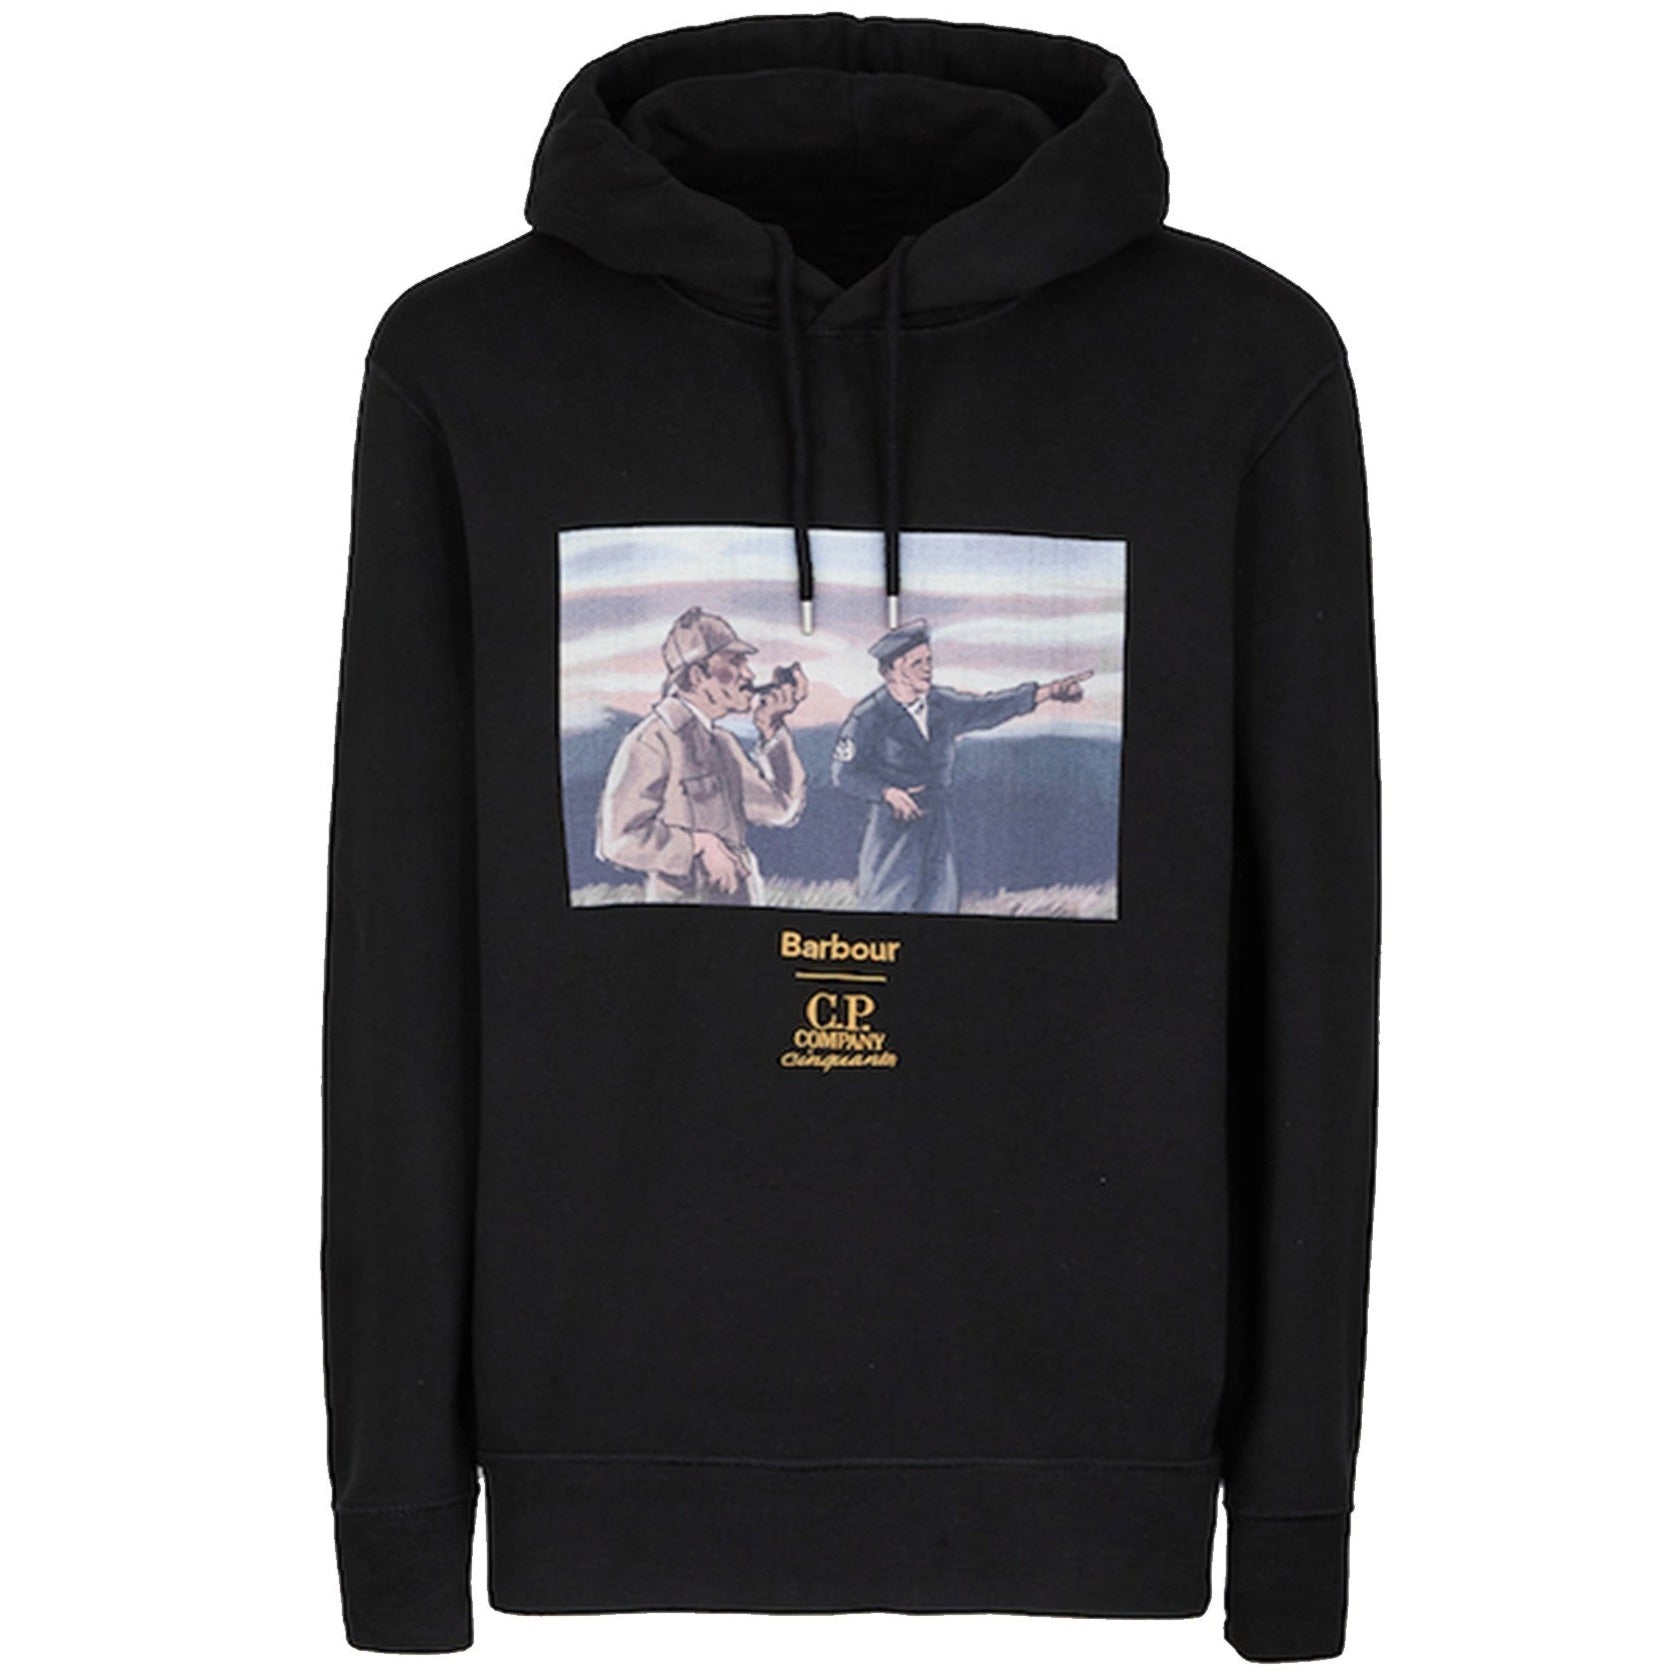 CP Company Barbour 50th Anniversary Hoodie - DANYOUNGUK